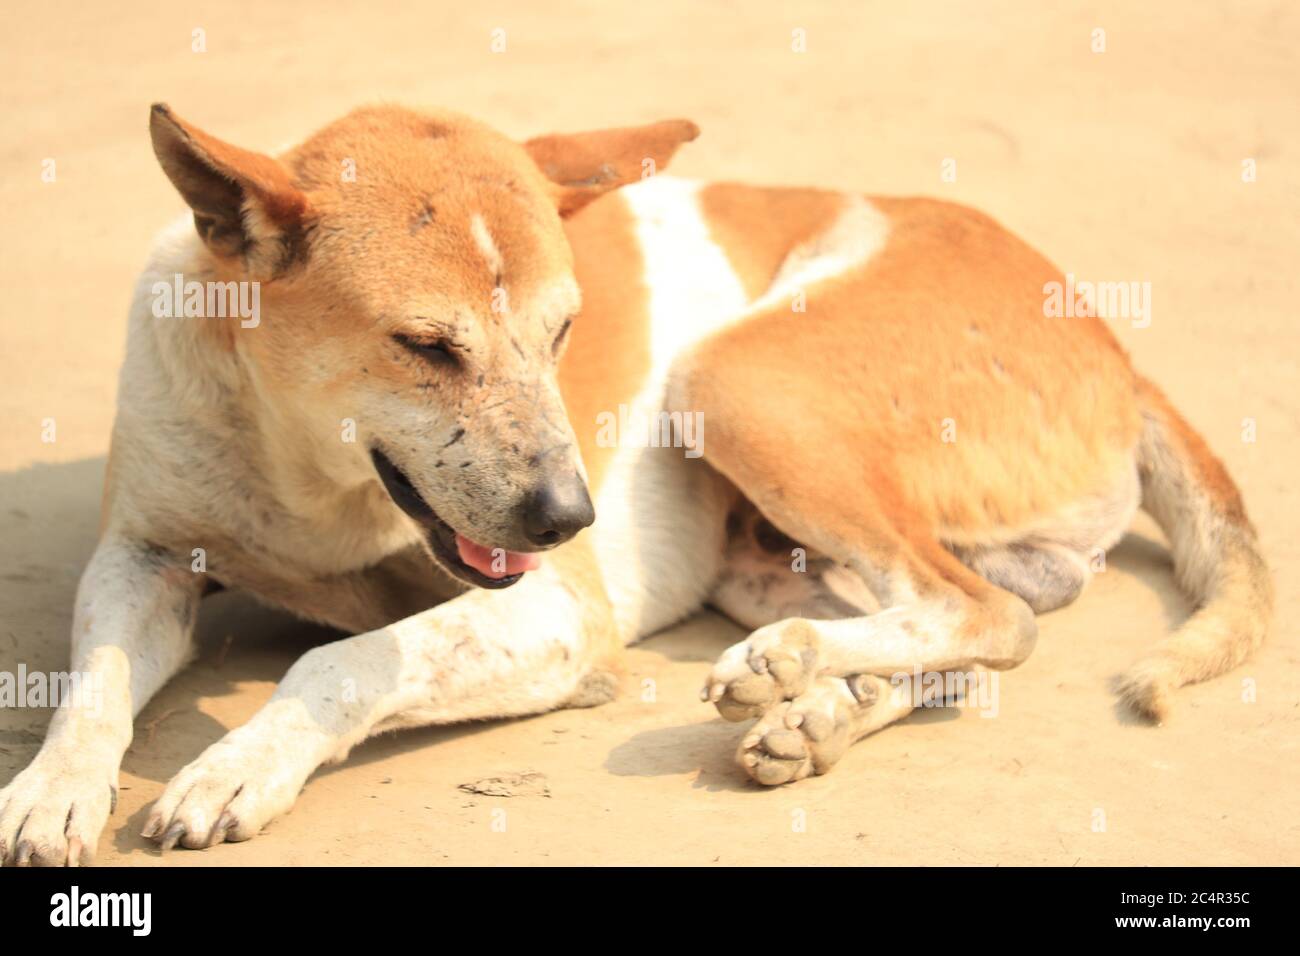 A Domestic Brown Color Dog is Sitting in the Sun. Stock Photo